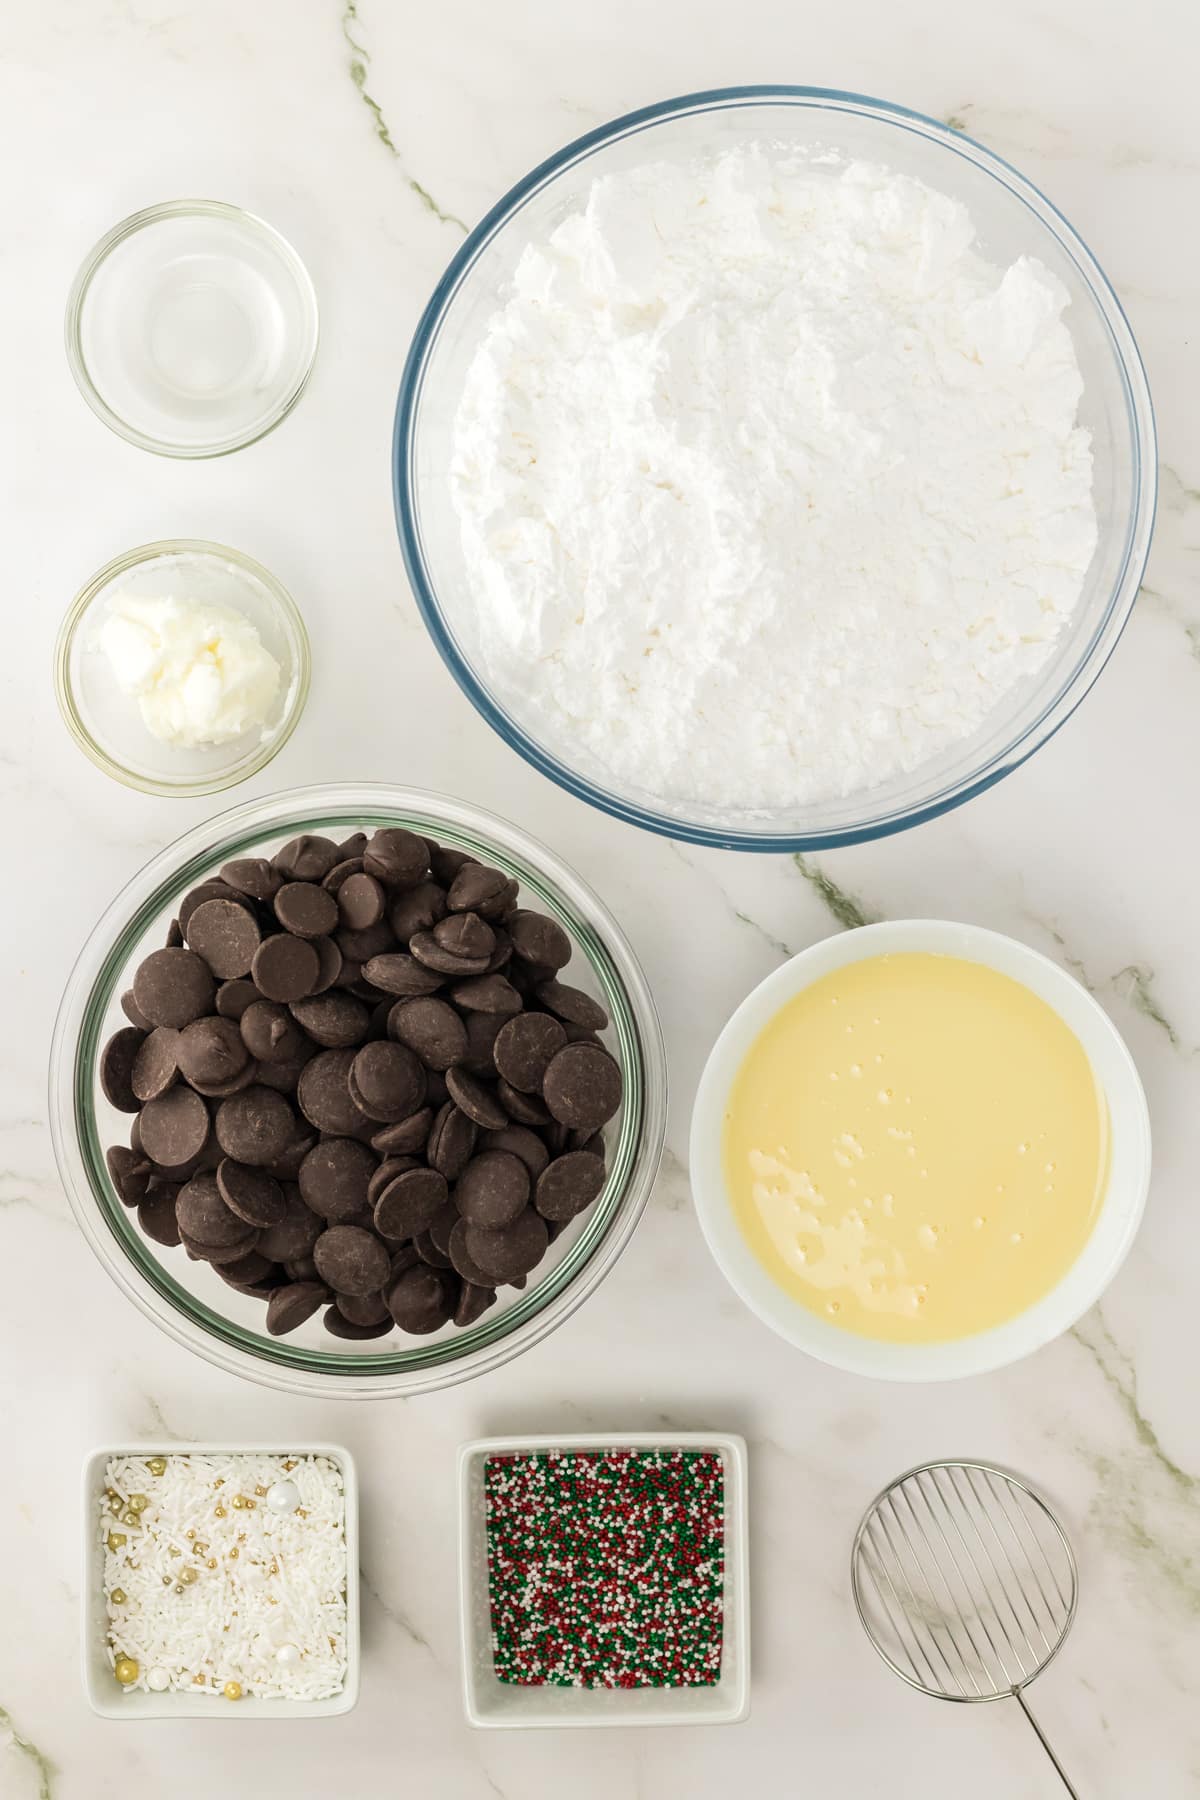 Ingredients for peppermint patties includes powdered or icing sugar, sweetened condensed milk, peppermint extract, dark chocolate wafers, vegetable shortening and assorted Christmas sprinkles